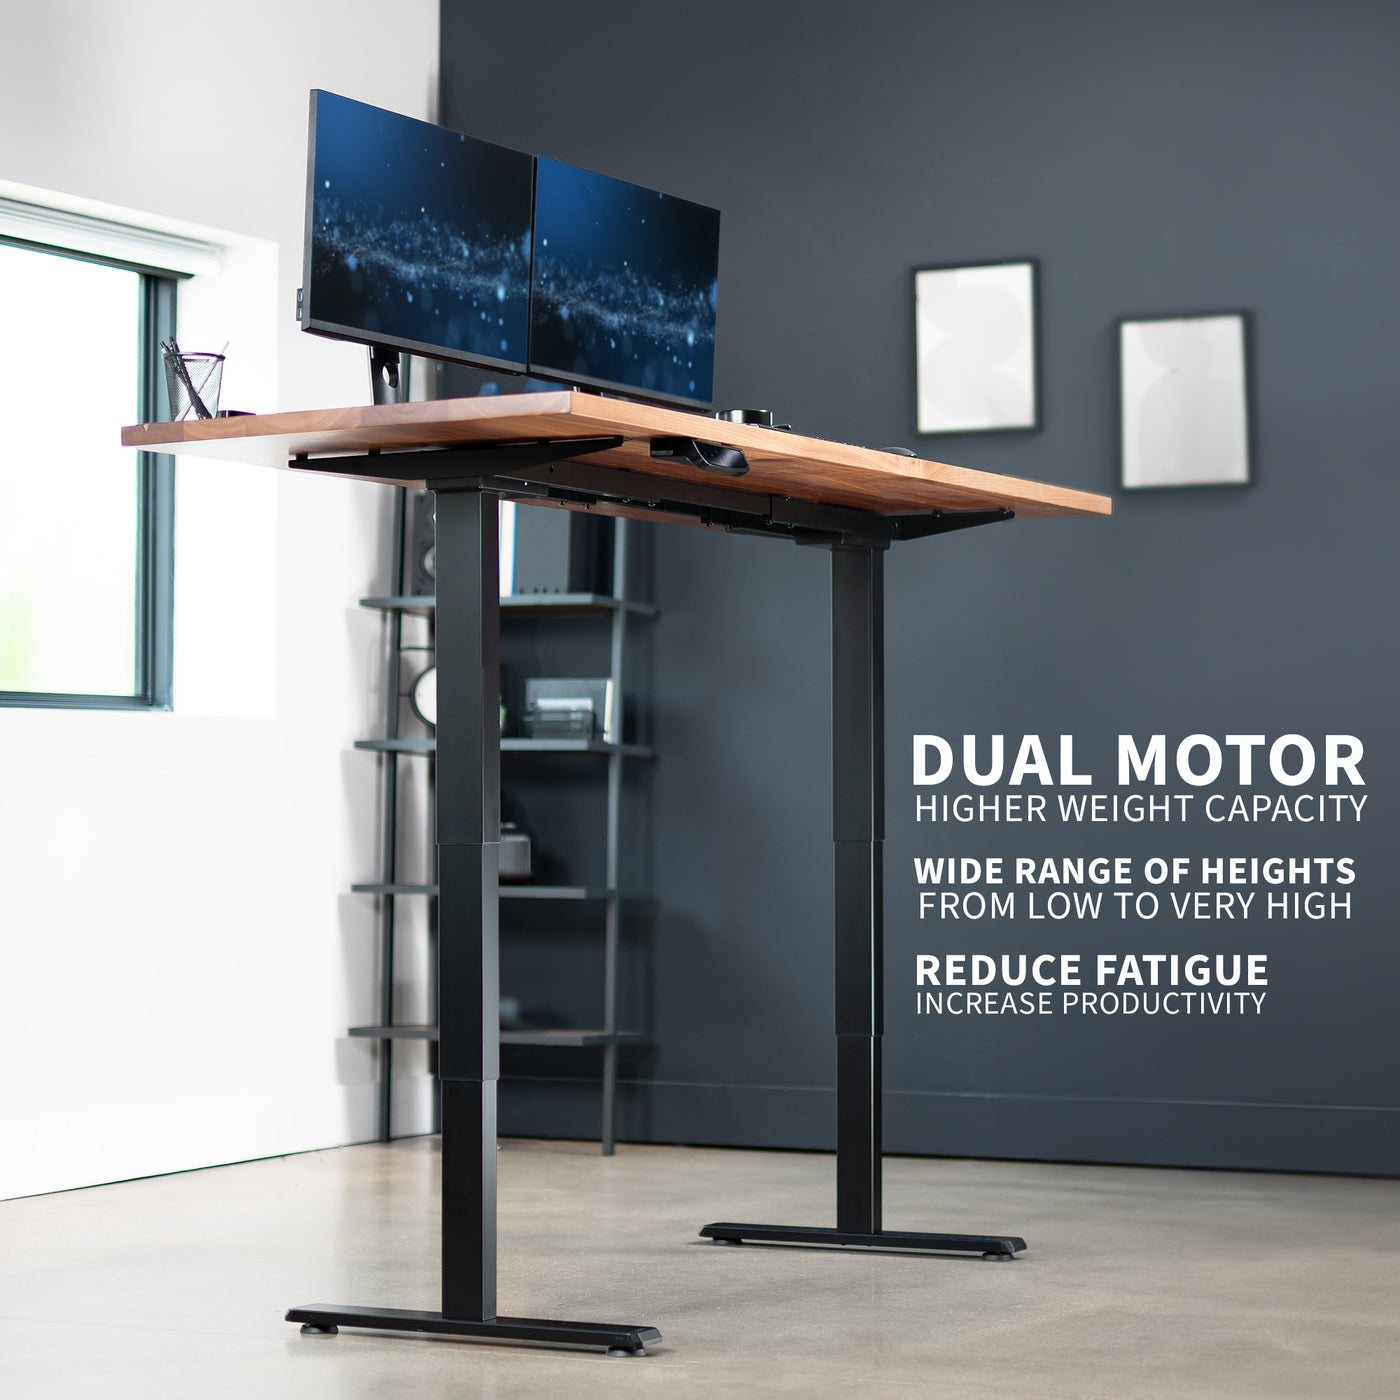 Electric height adjustable dual motor desk frame with programmable memory controller.